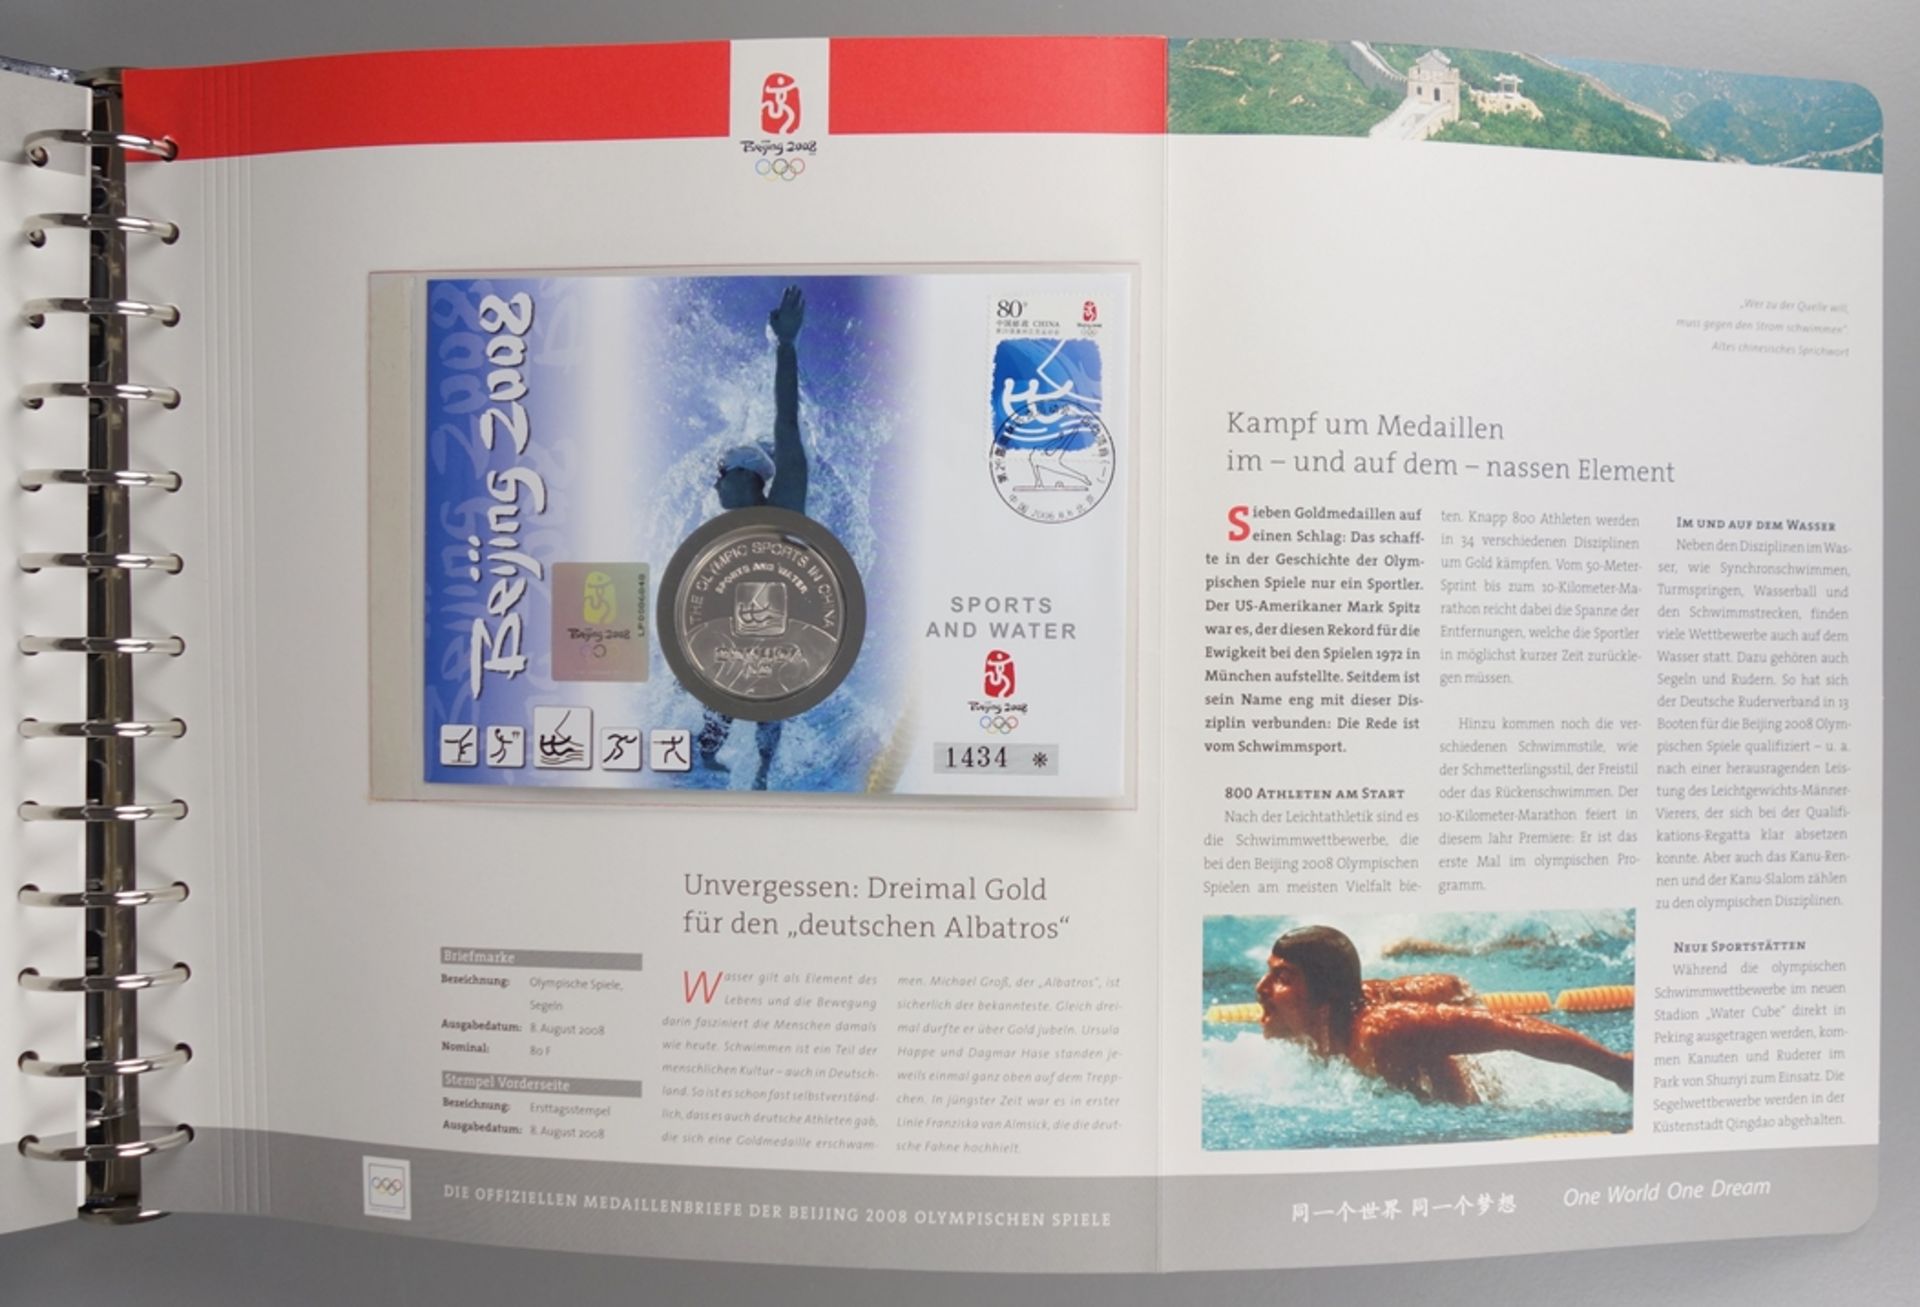 2 albums, medals and medal covers, Beijing 2008 Olympics and album "10 Jahre Dt.Einheit" (10 Years  - Image 7 of 9